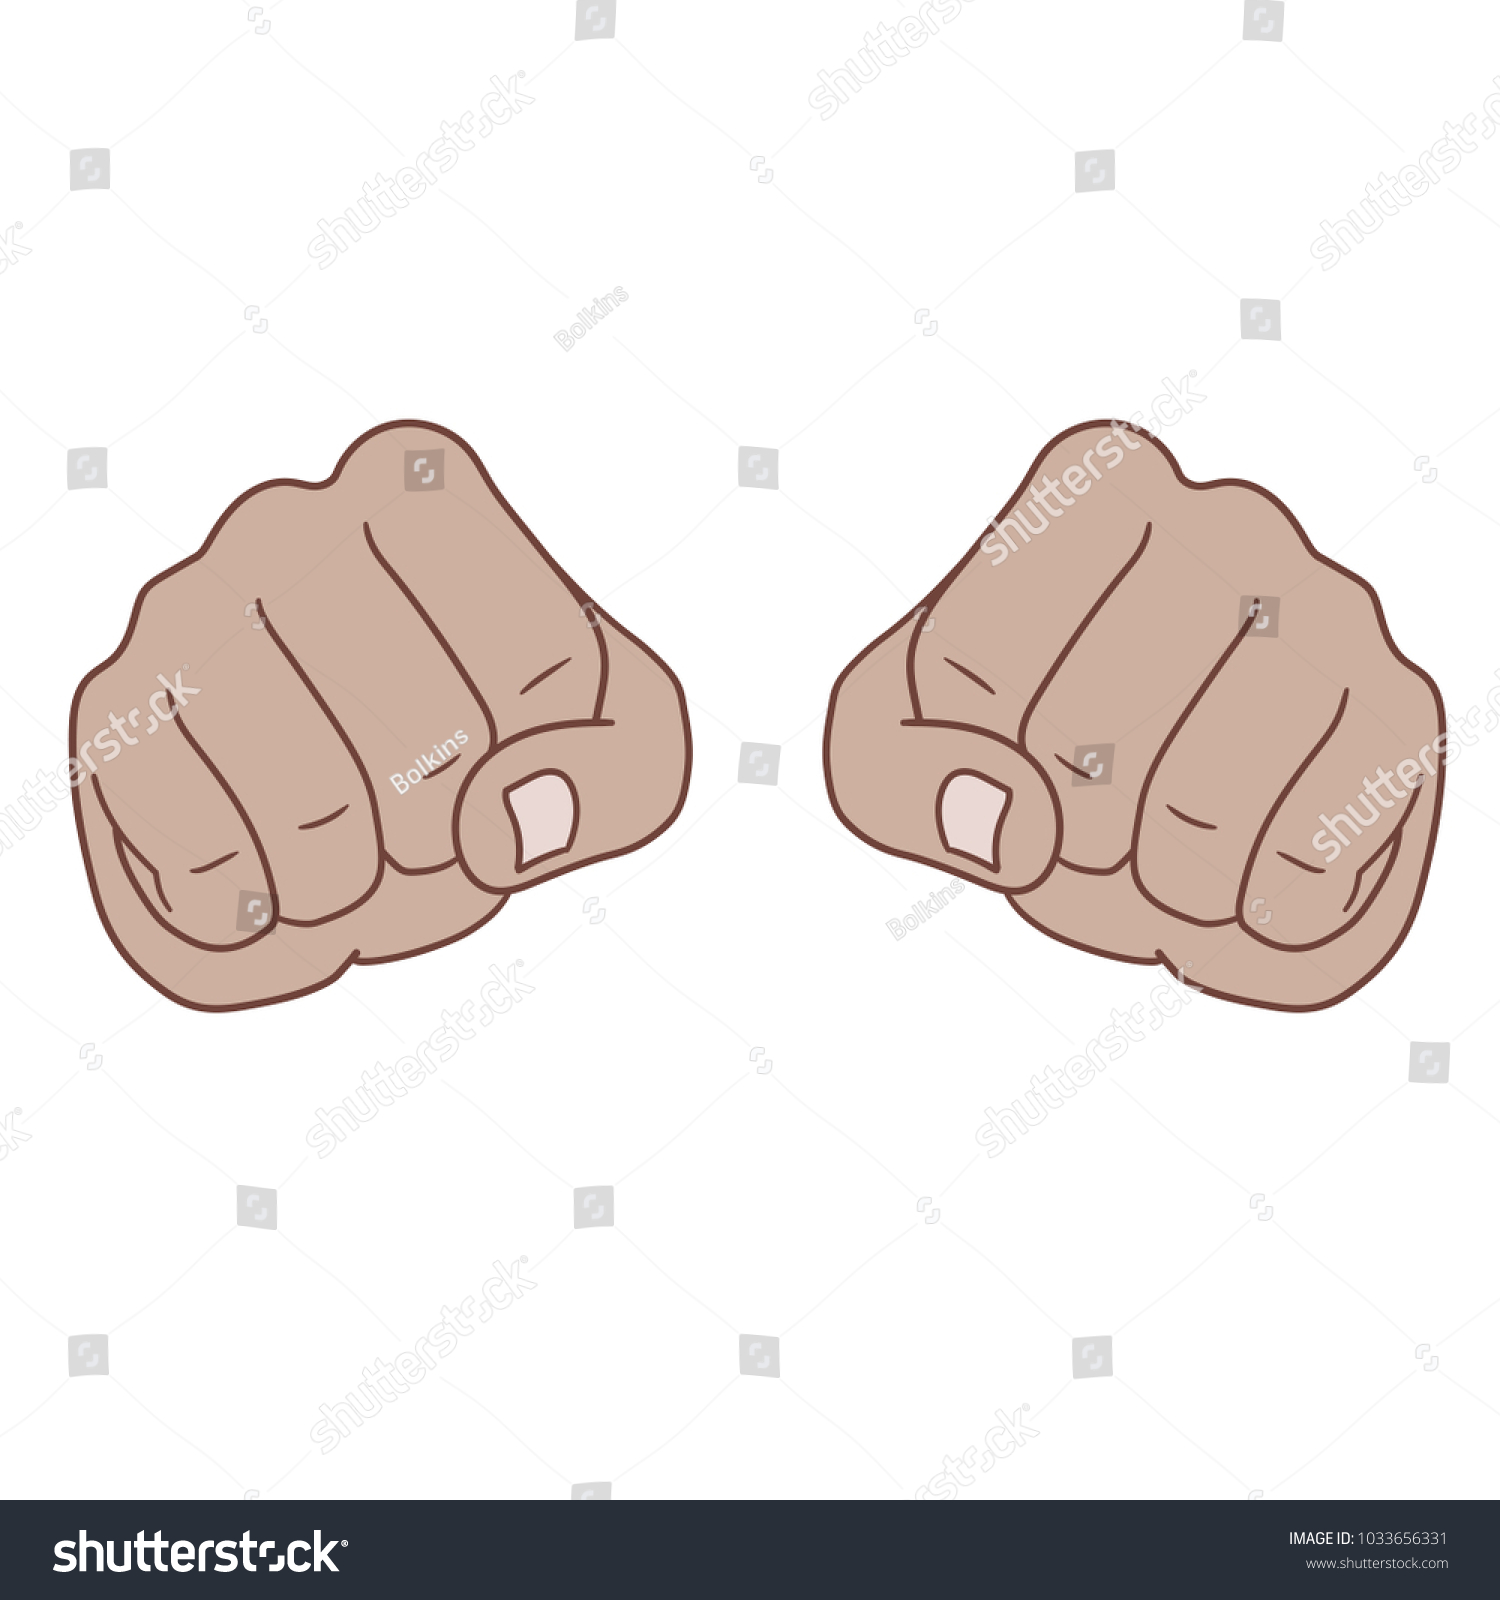 Two fists photo